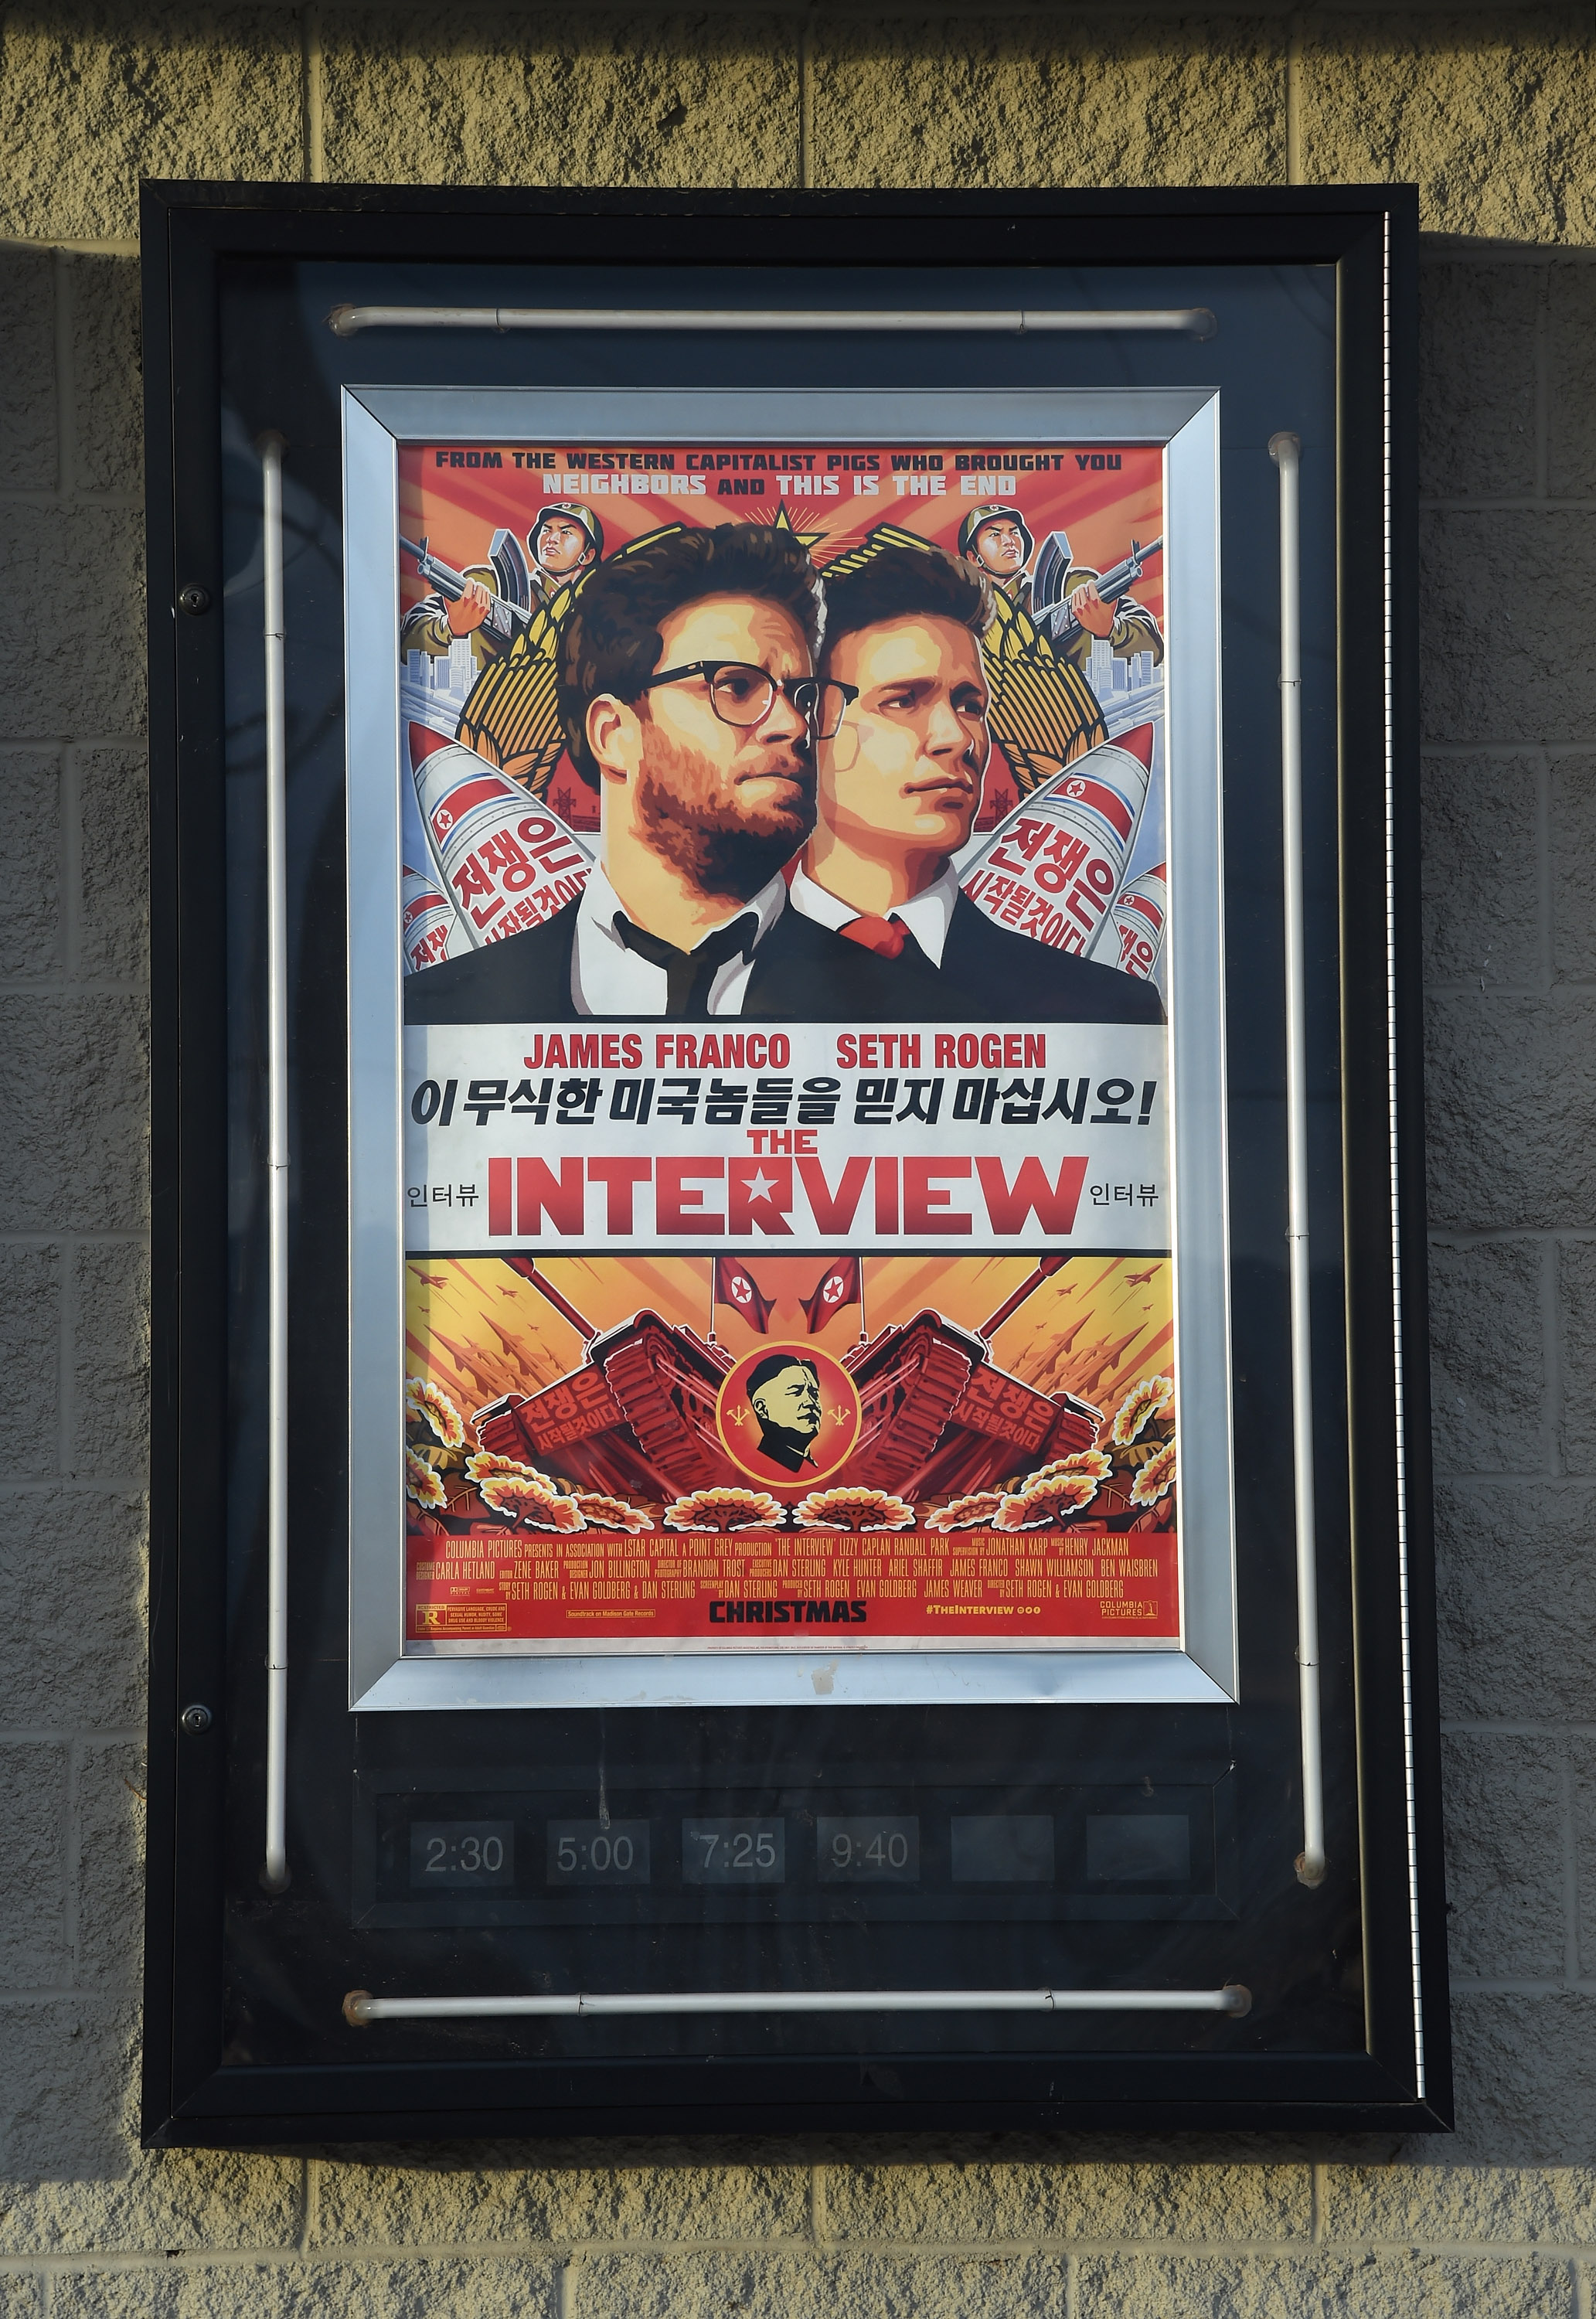 A movie poster for "The Interview" is displayed outside the Megaplex Theatres - Stadium 6 on Dec. 25, 2014 in Mesquite, Nevada. (Ethan Miller&mdash;Getty Images)